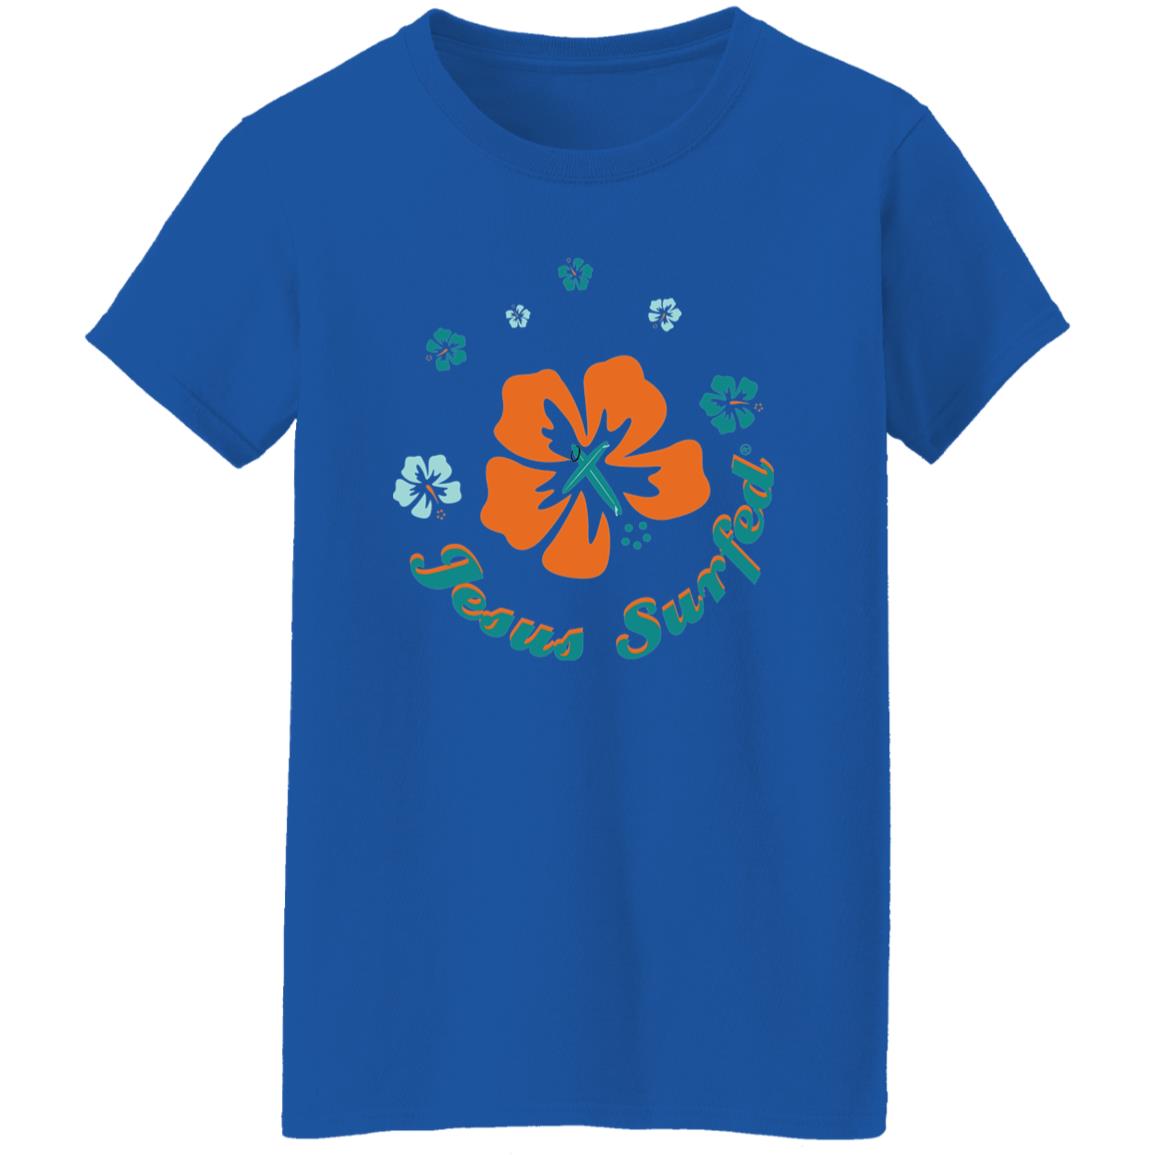 Ring of Flowers Women's Cotton T-Shirt